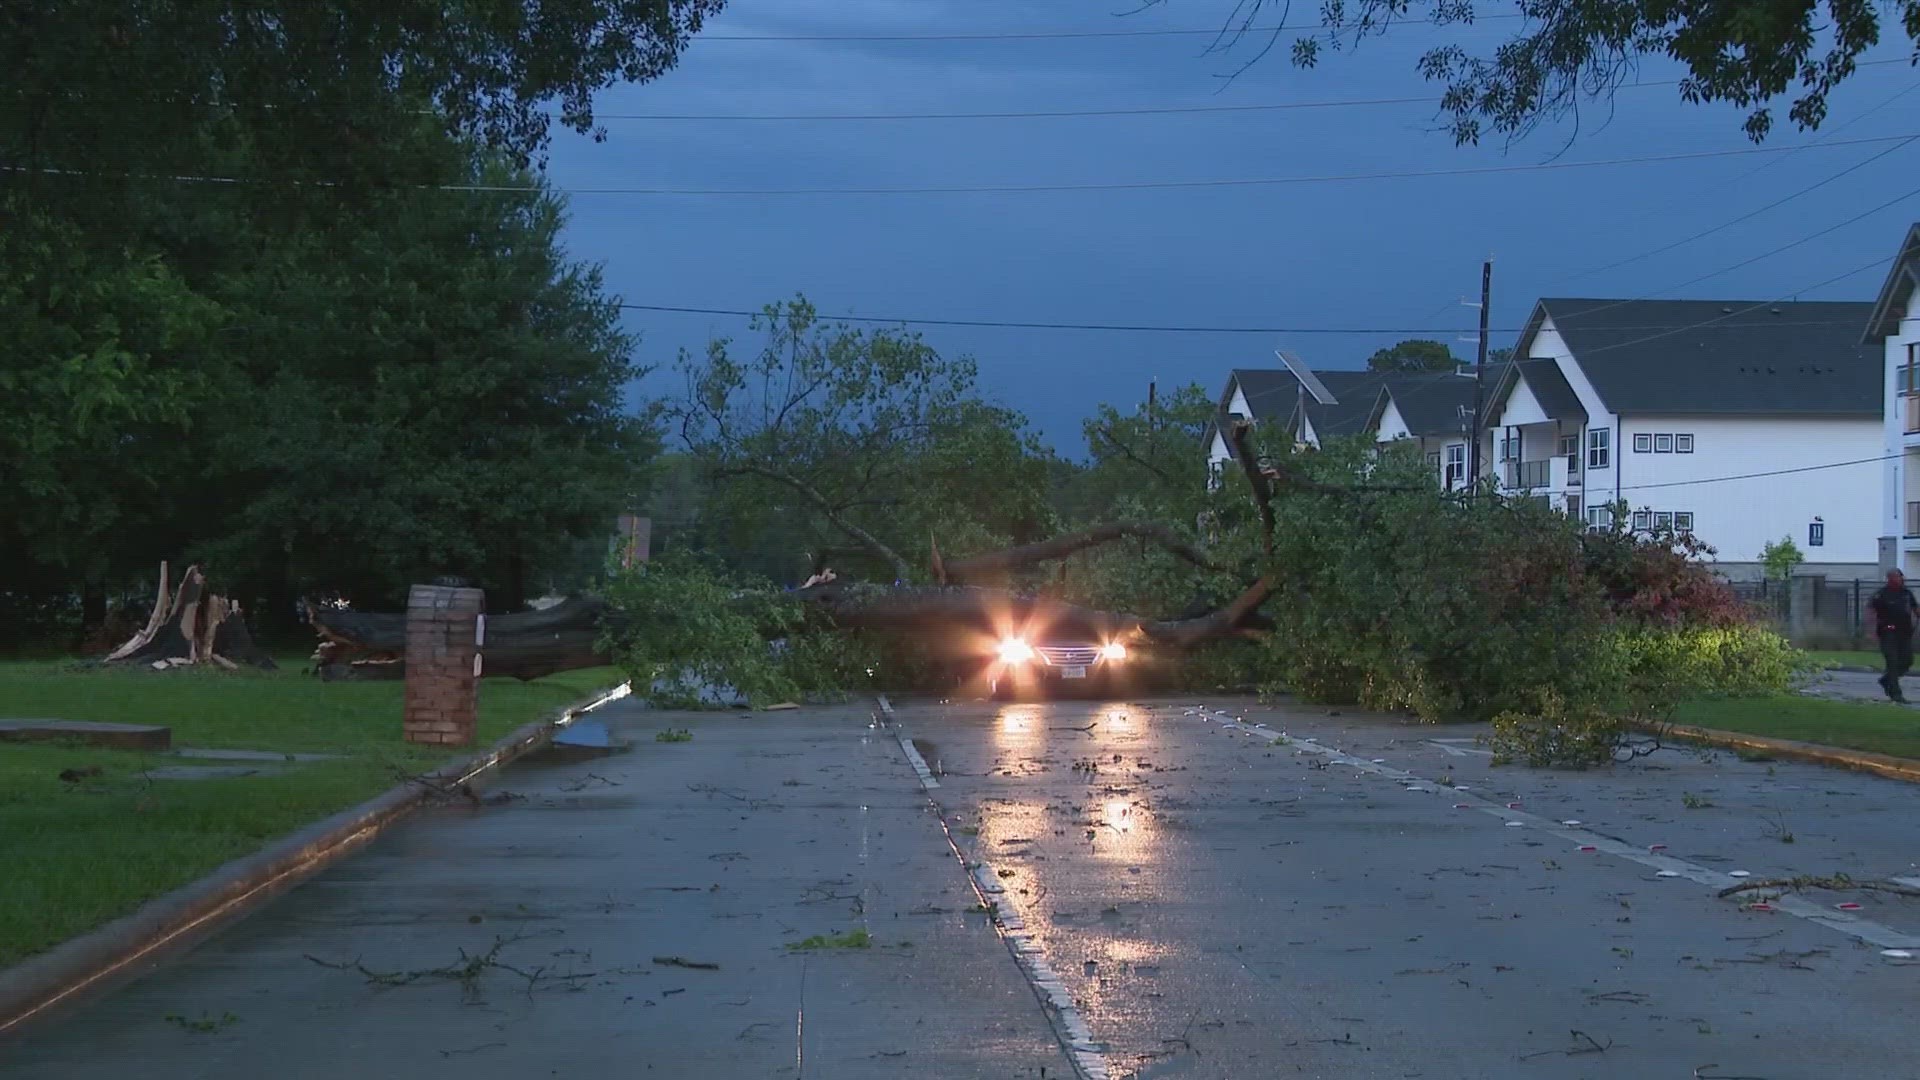 A tree fell on a vehicle in north Harris County during Monday's storms and a woman was killed, according to the Harris County Precinct 4 Constable's Office.